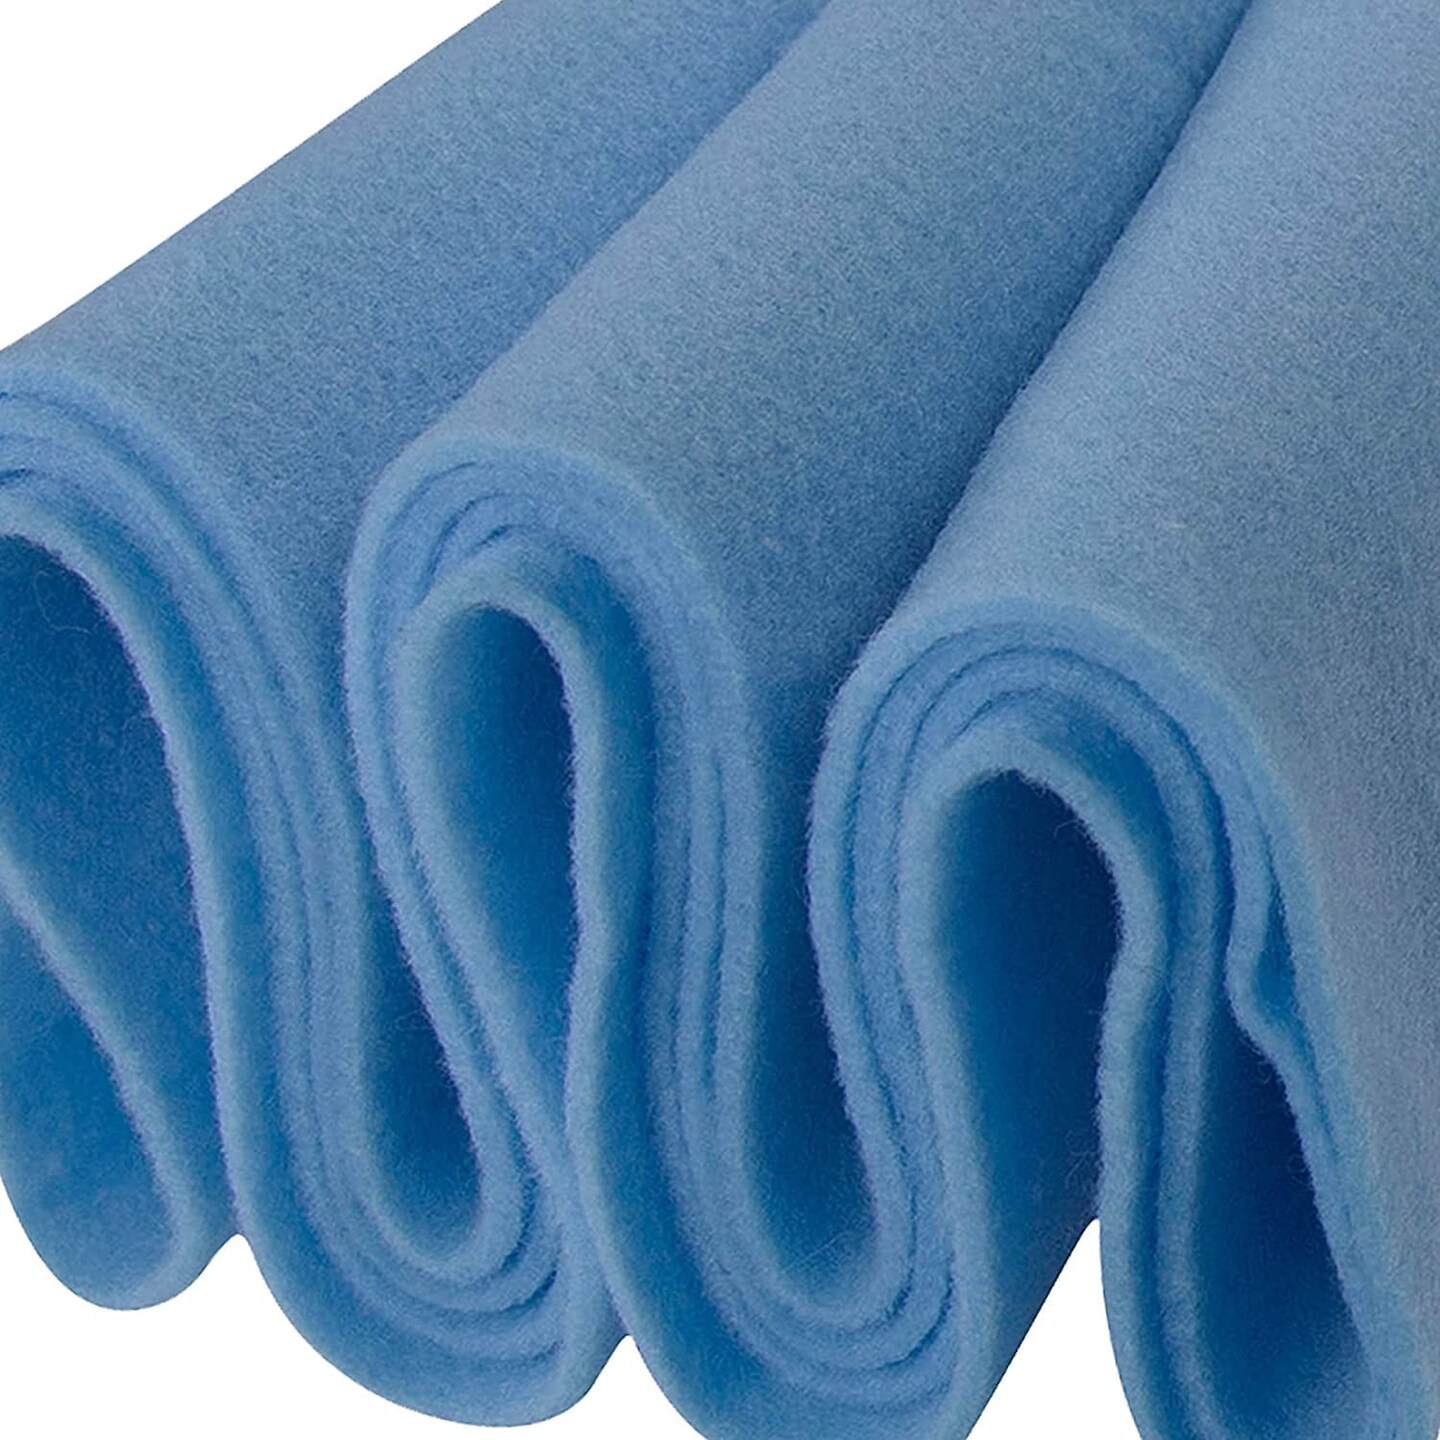 FabricLA Craft Felt Fabric - 72 Inch Wide & 1.6mm Thick Non-Stiff Felt  Fabric by The Yard - Use This Soft Felt Roll for Crafts - Felt Material  Pack - Baby Blue